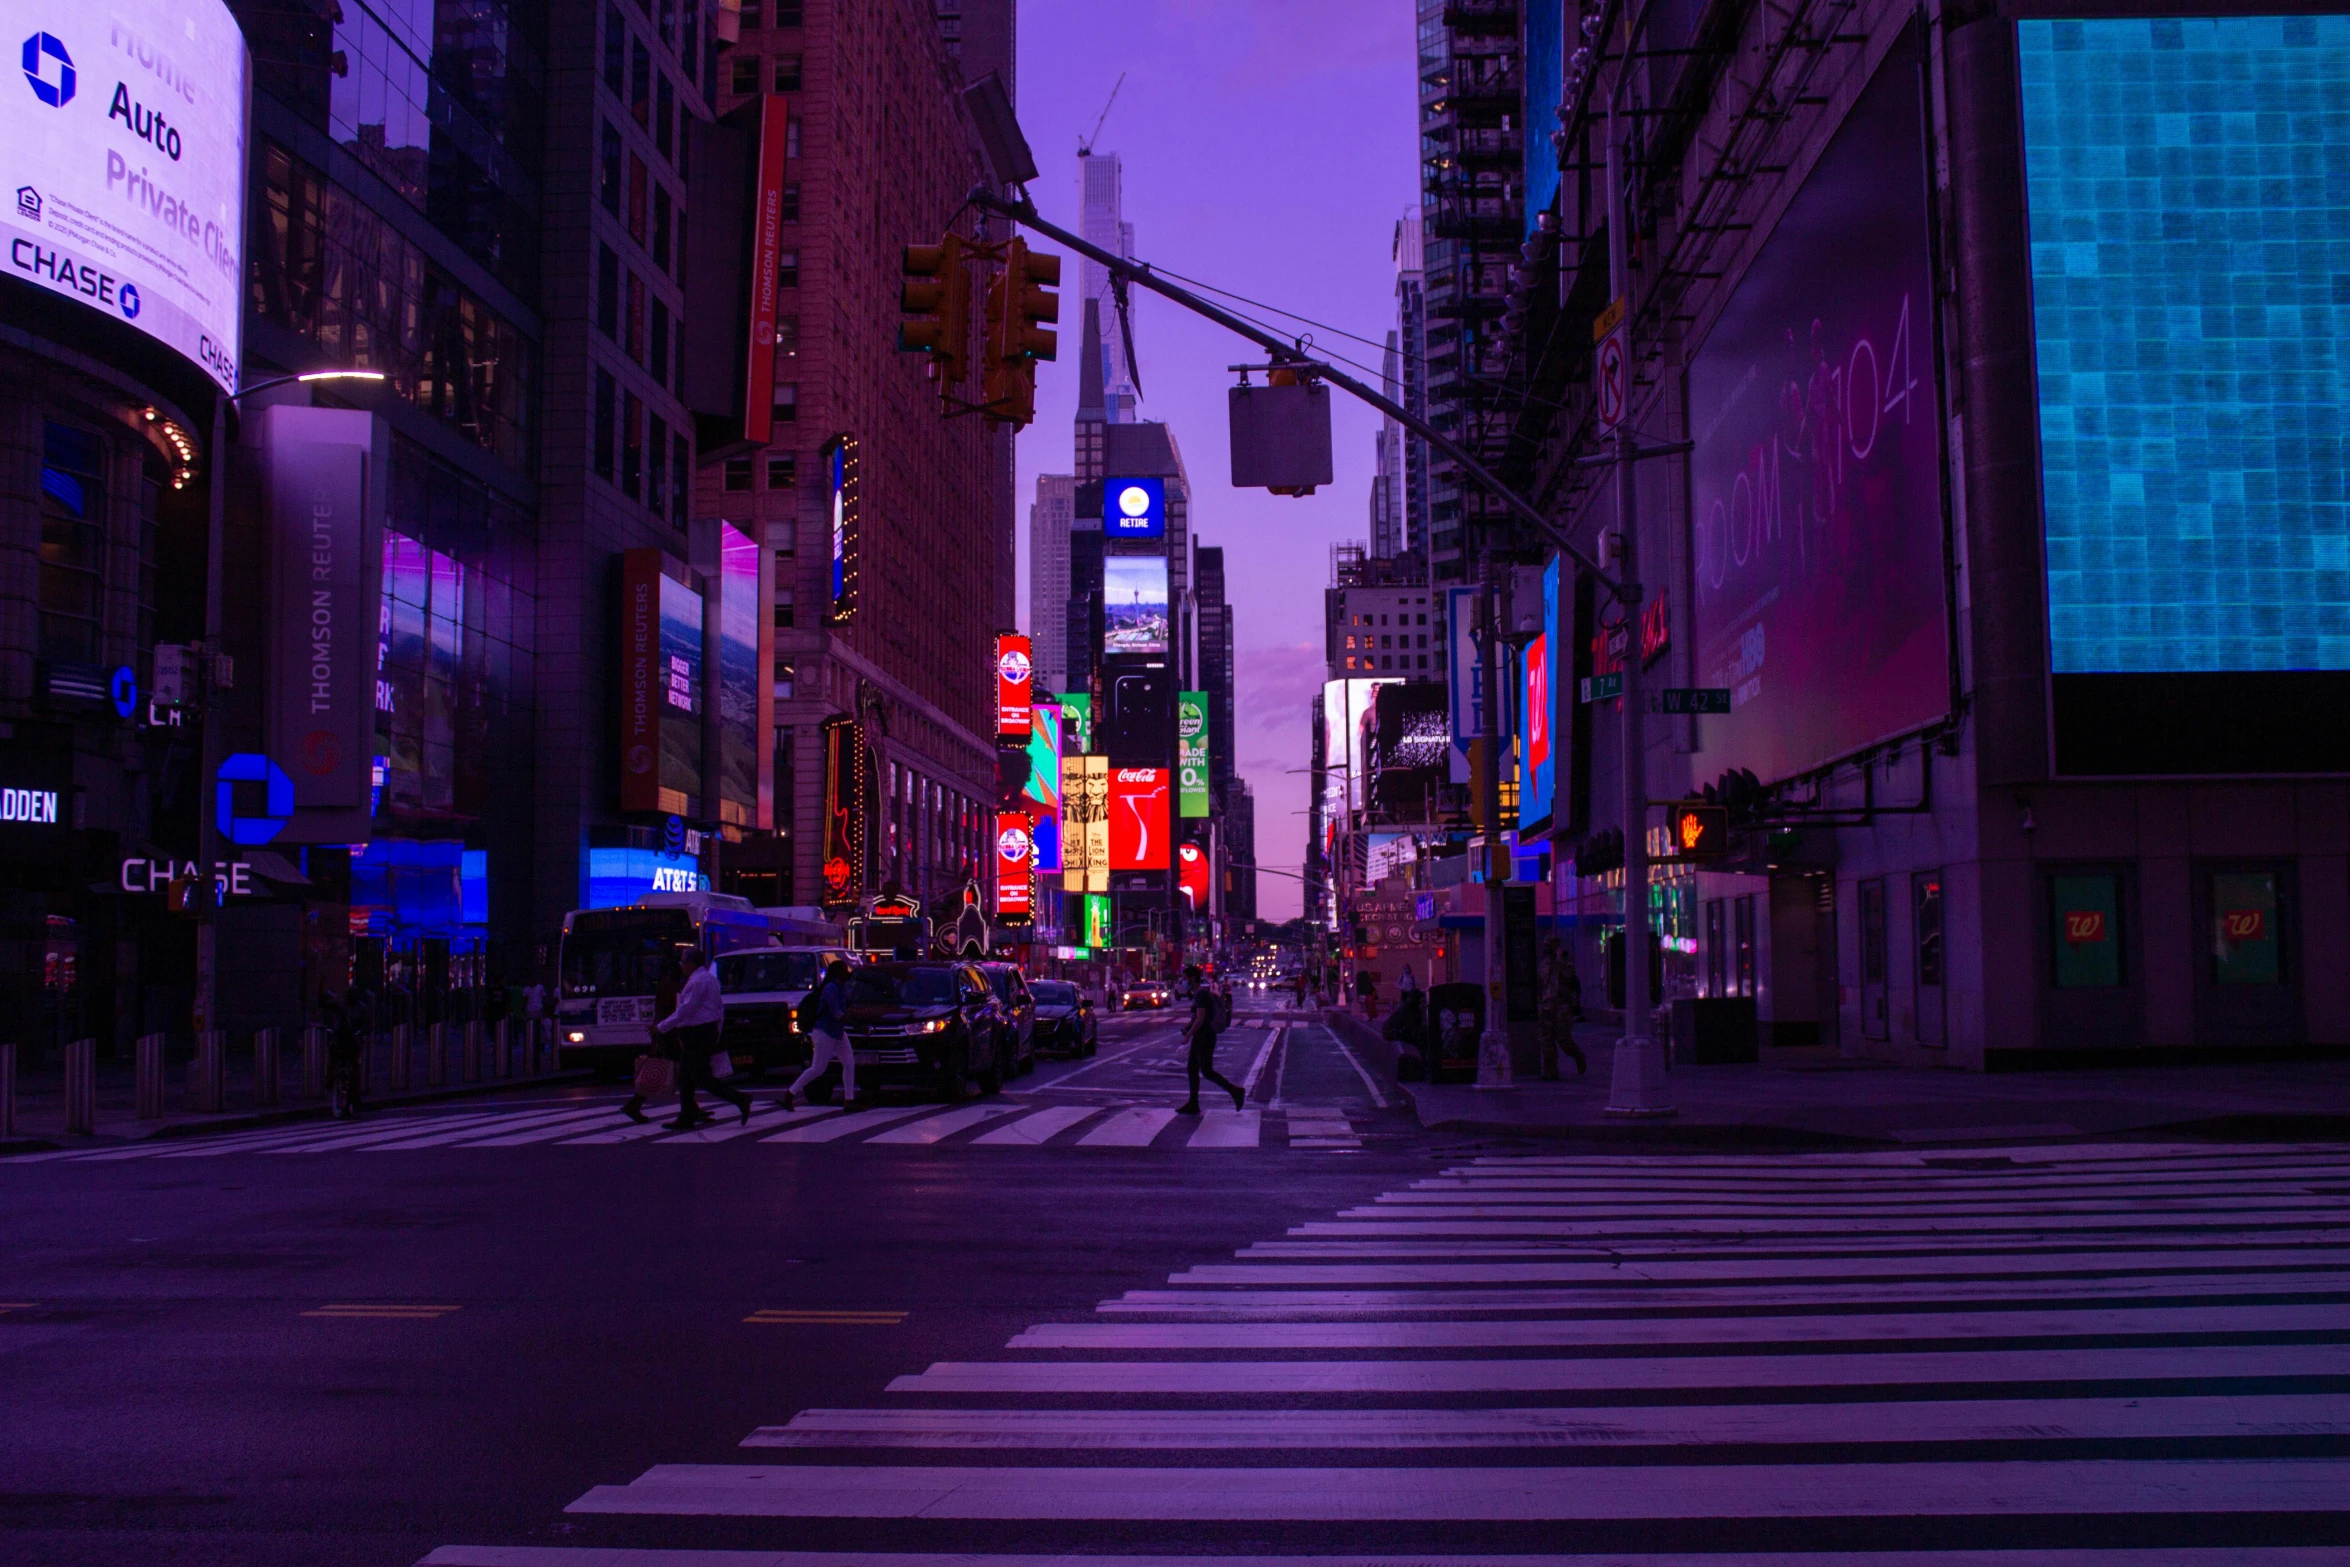 a city street filled with lots of traffic at night, pexels contest winner, shades of purple, time square, album art, empty streetscapes